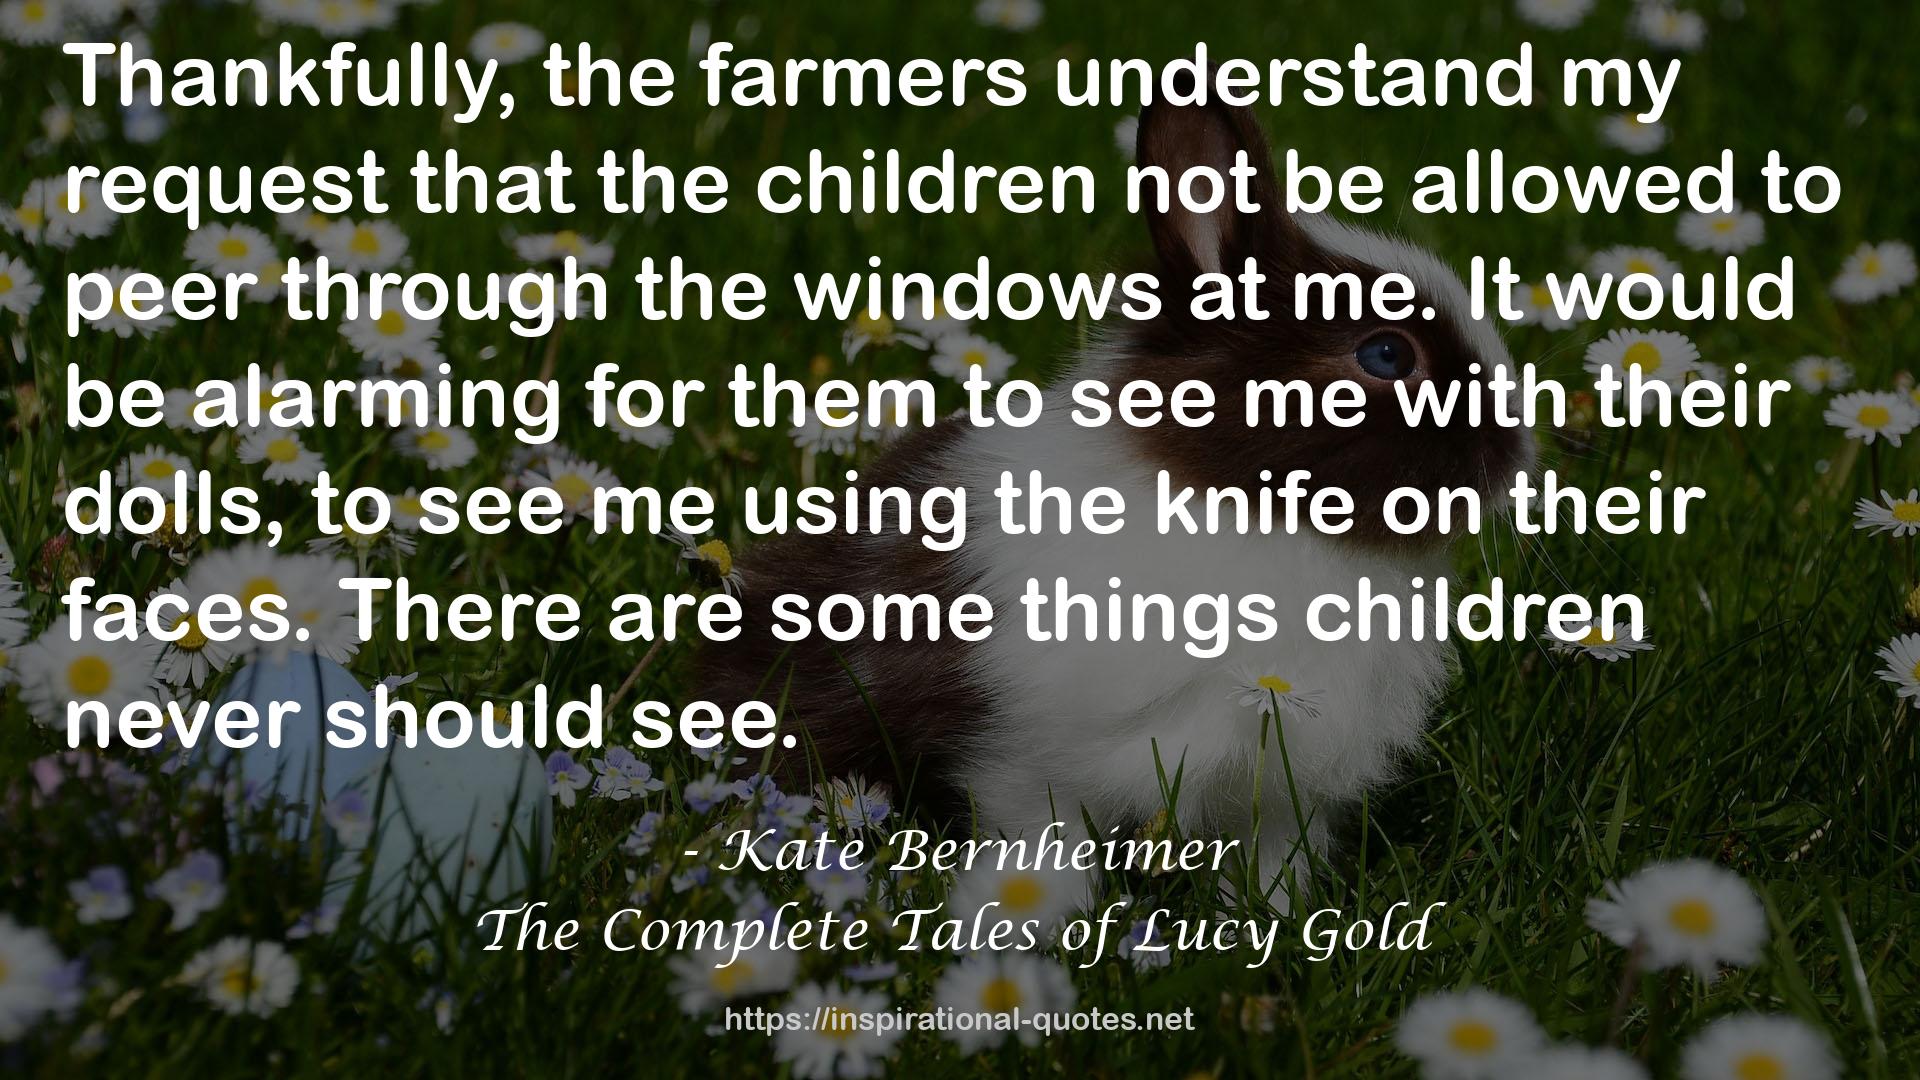 Kate Bernheimer QUOTES